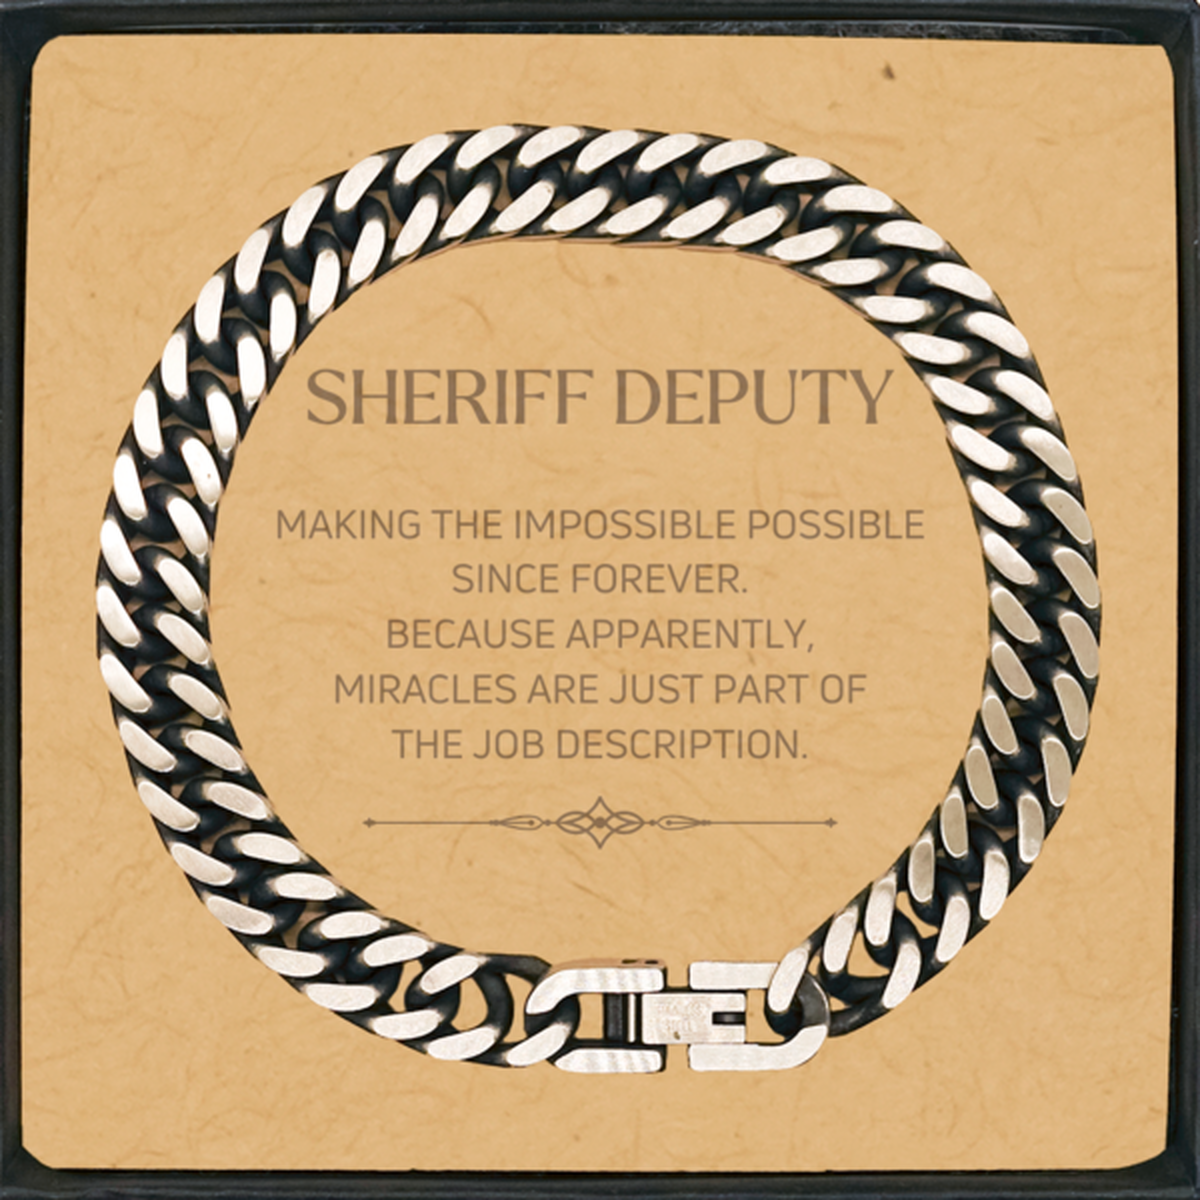 Funny Sheriff Deputy Gifts, Miracles are just part of the job description, Inspirational Birthday Cuban Link Chain Bracelet For Sheriff Deputy, Men, Women, Coworkers, Friends, Boss